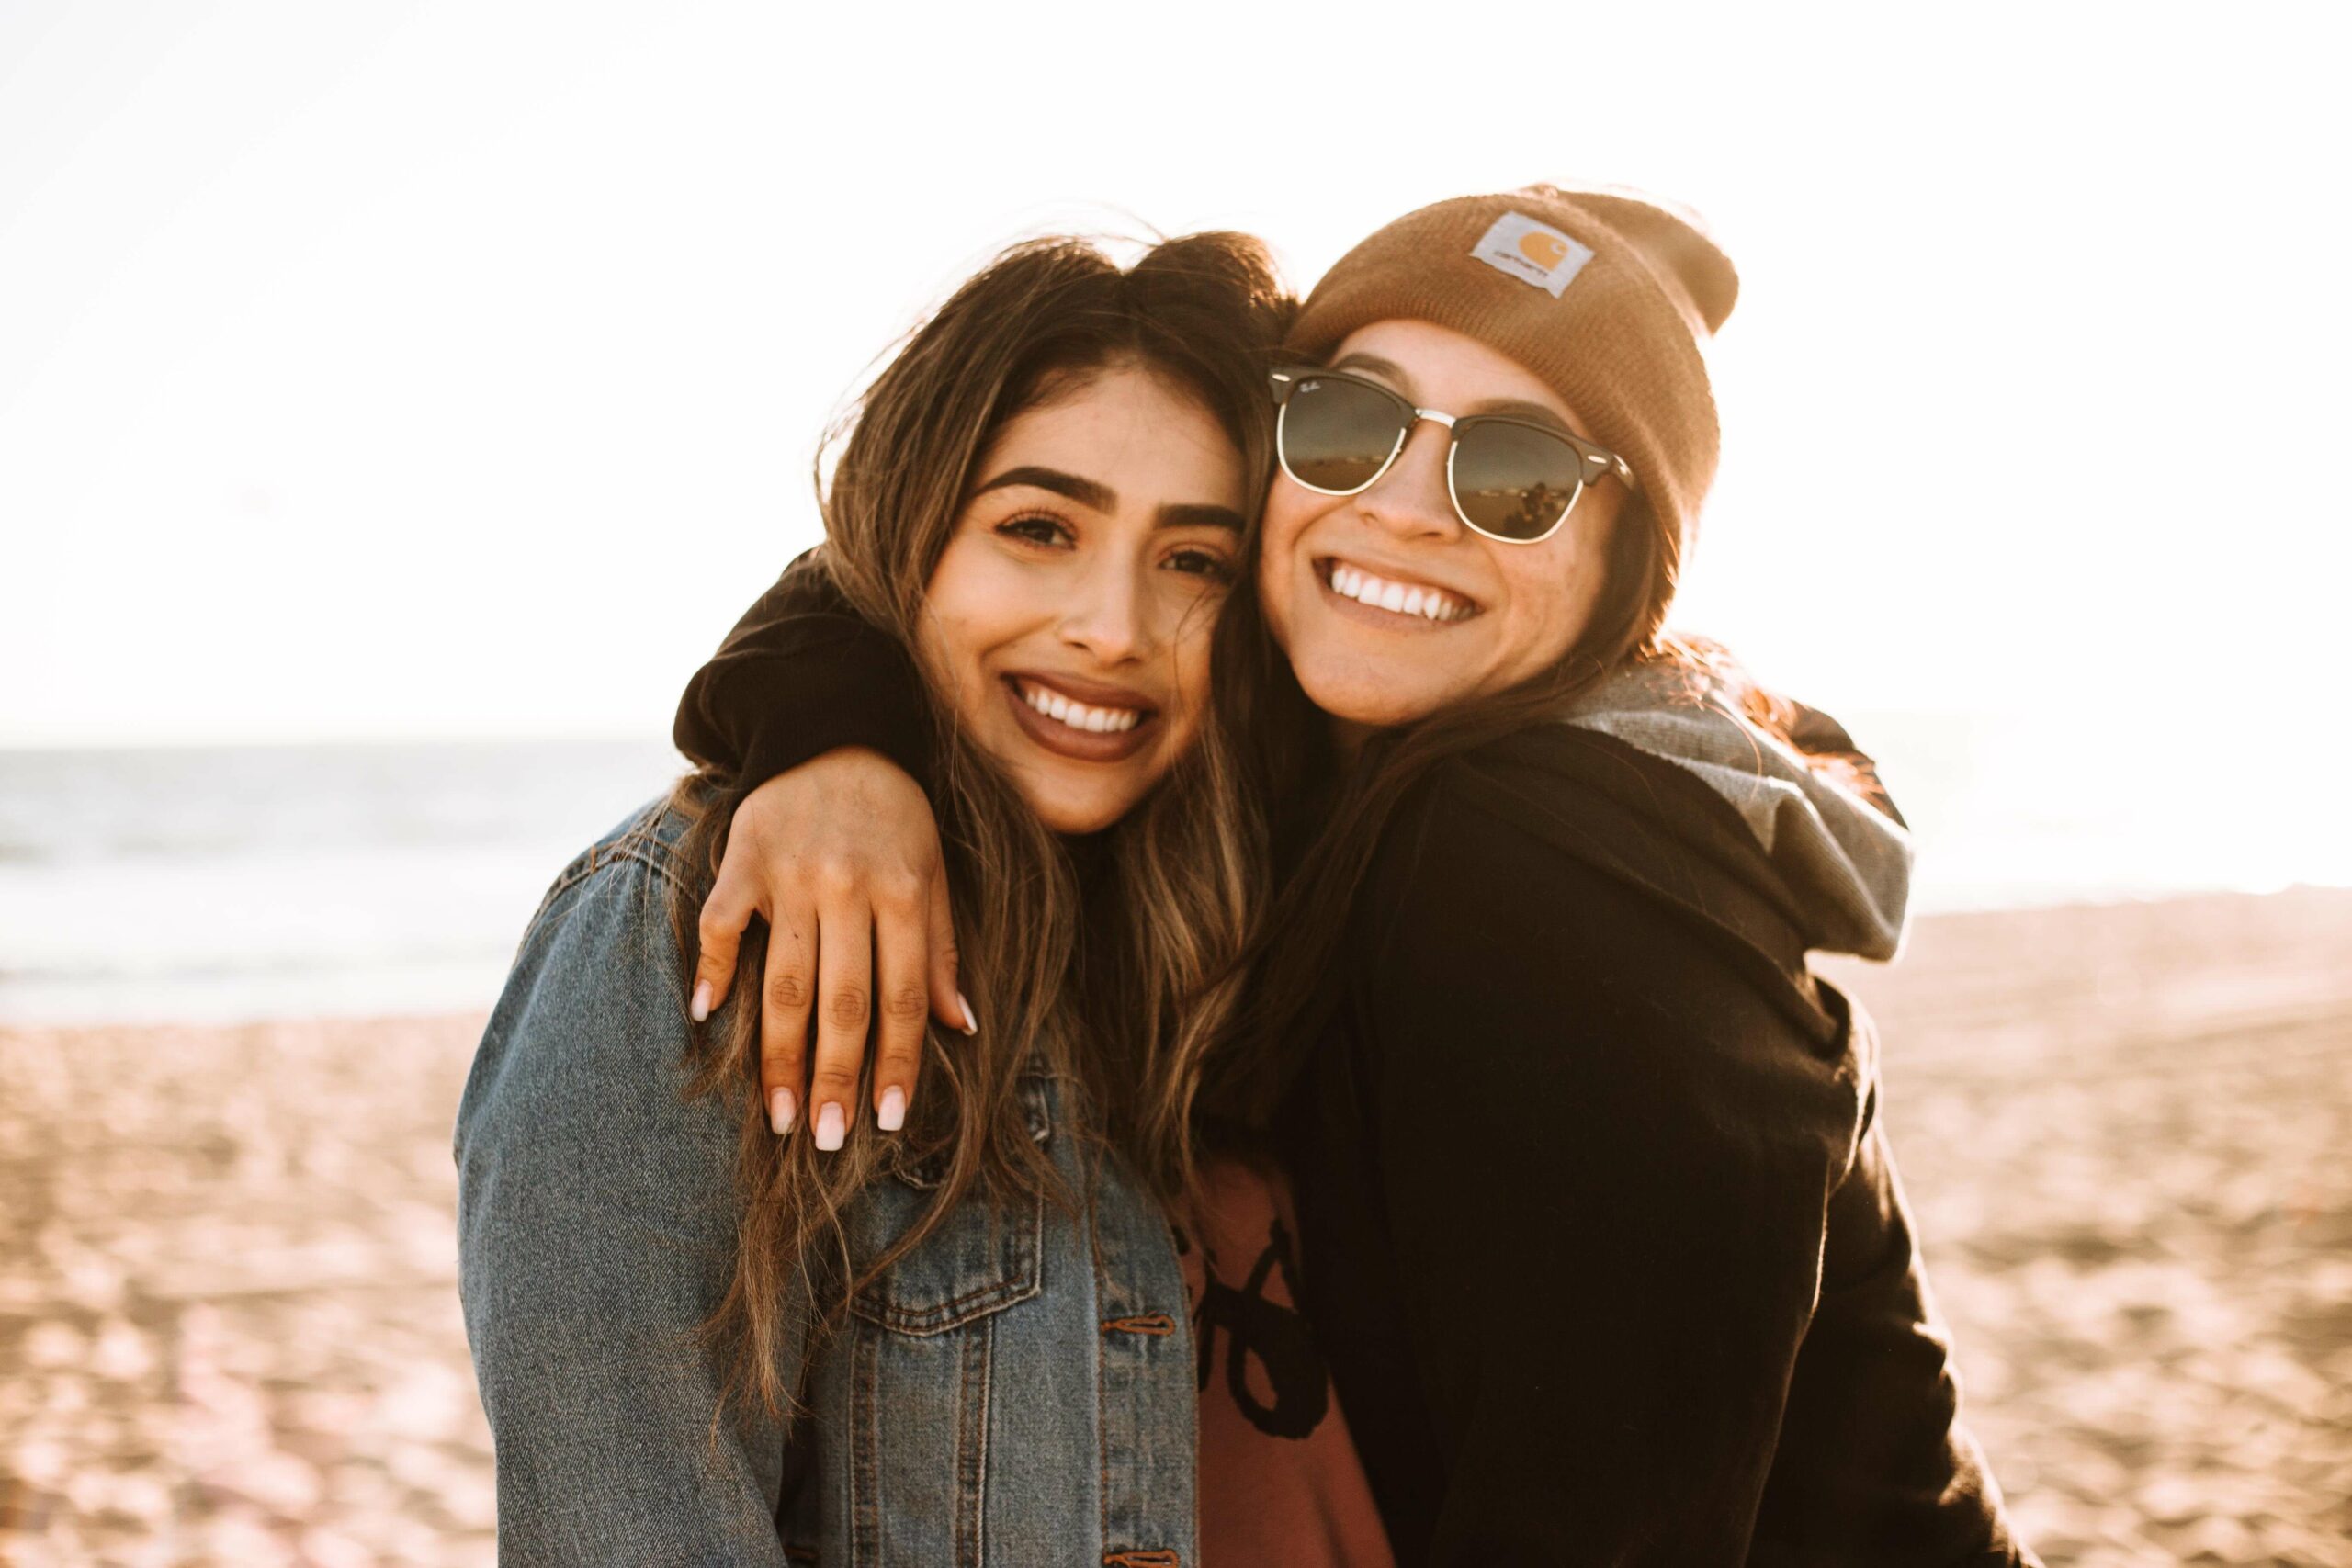 Drug recovery programs portrait of two cheerful young women standing together and looking at camera isolated over blurred background